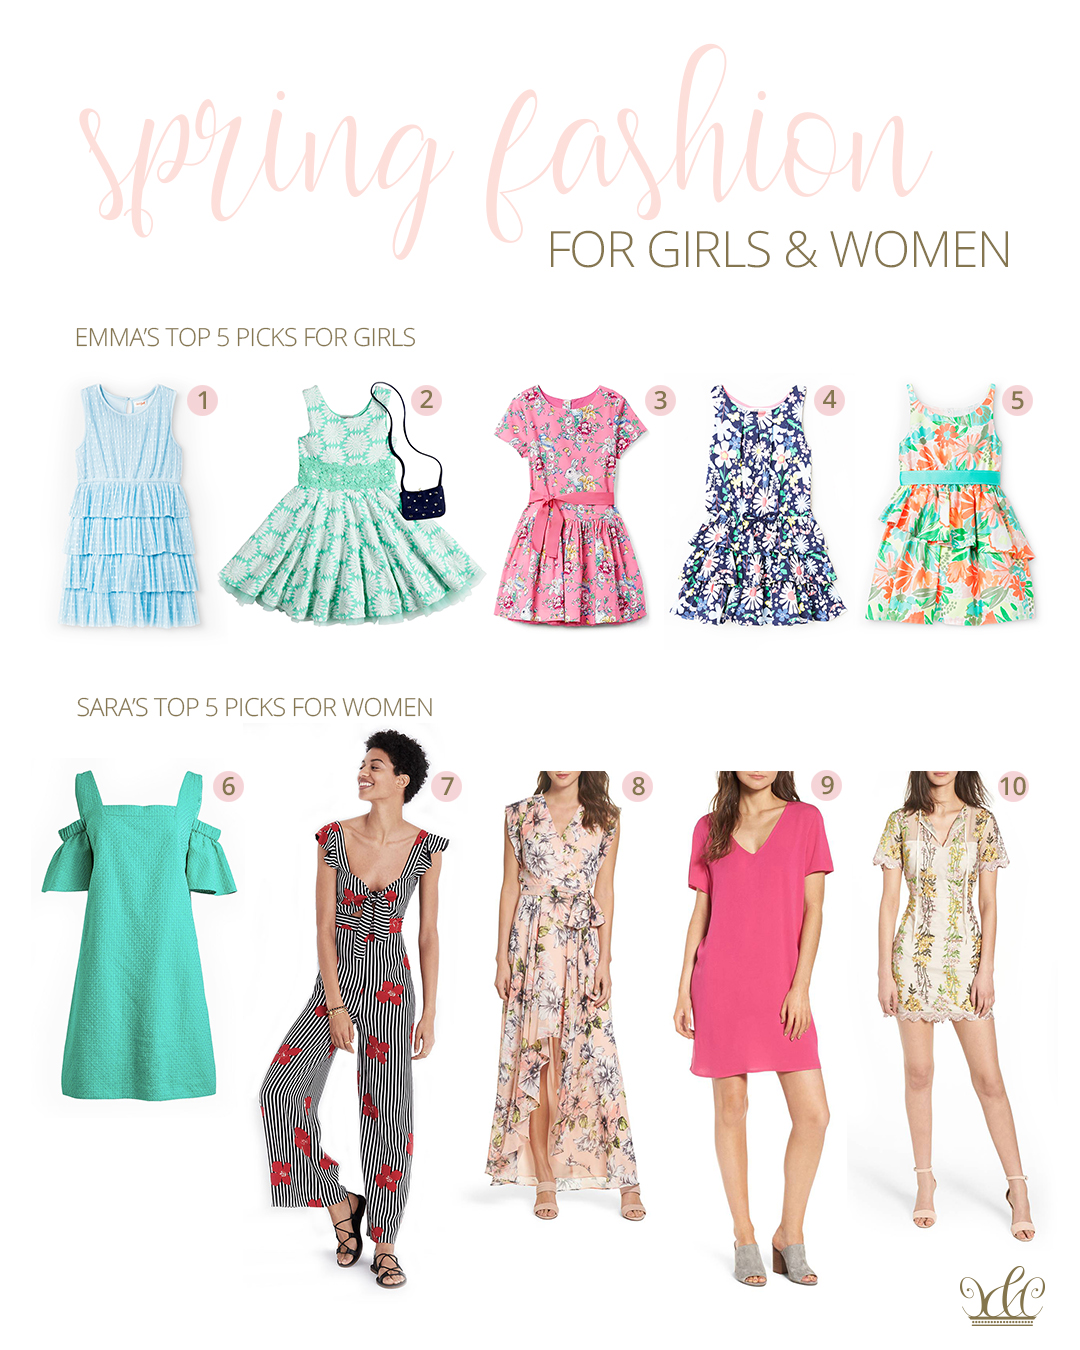 Spring dresses for women and girls